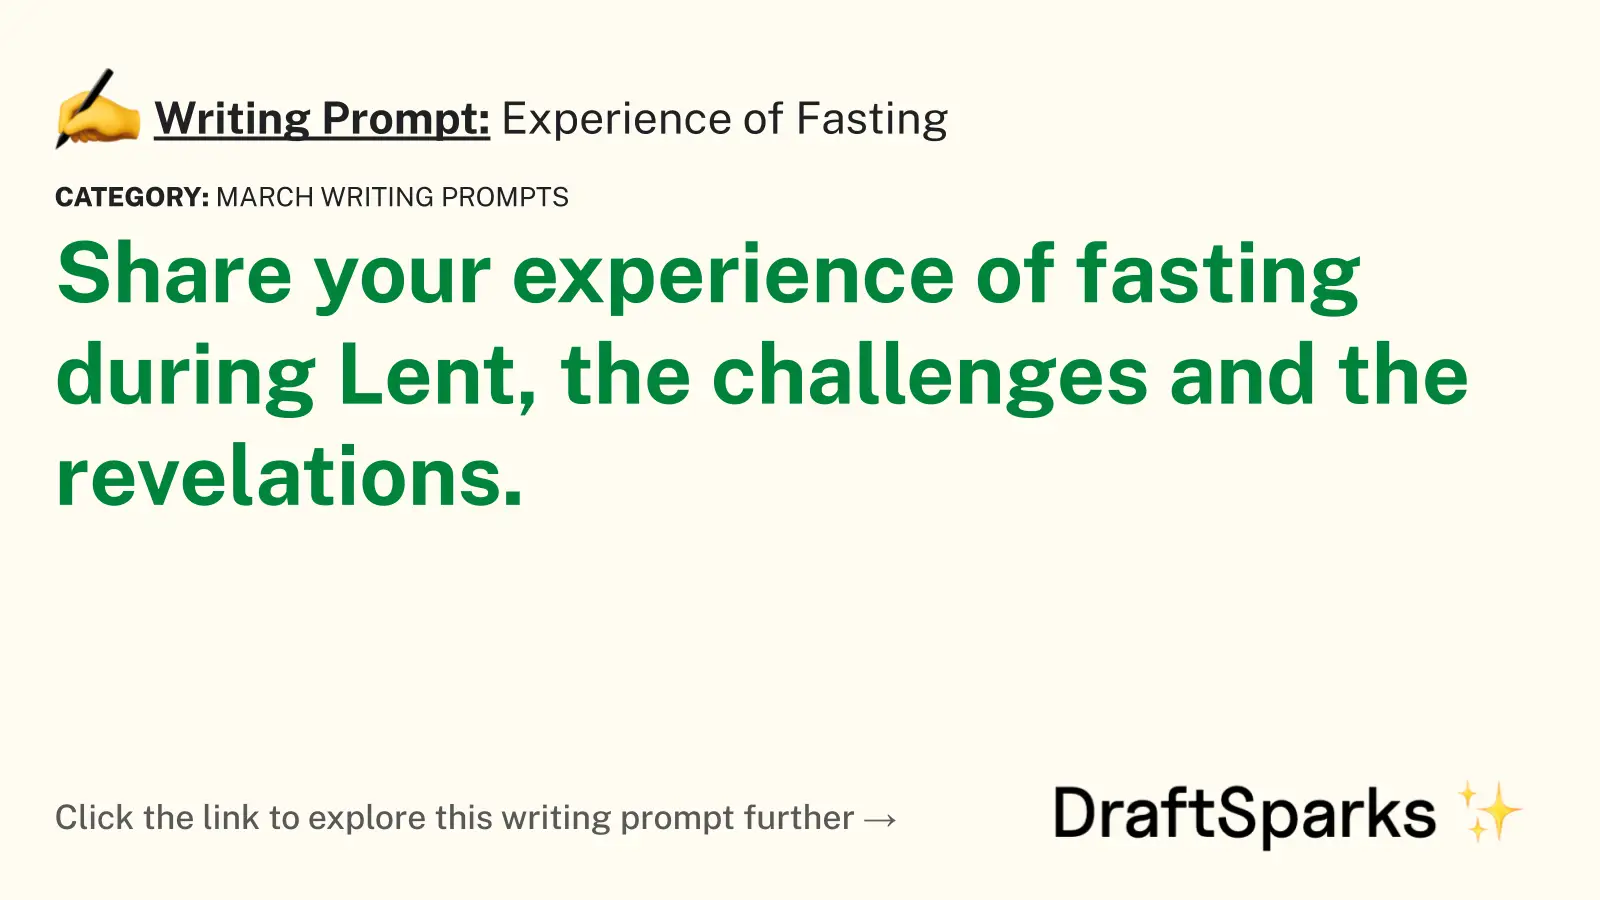 Experience of Fasting